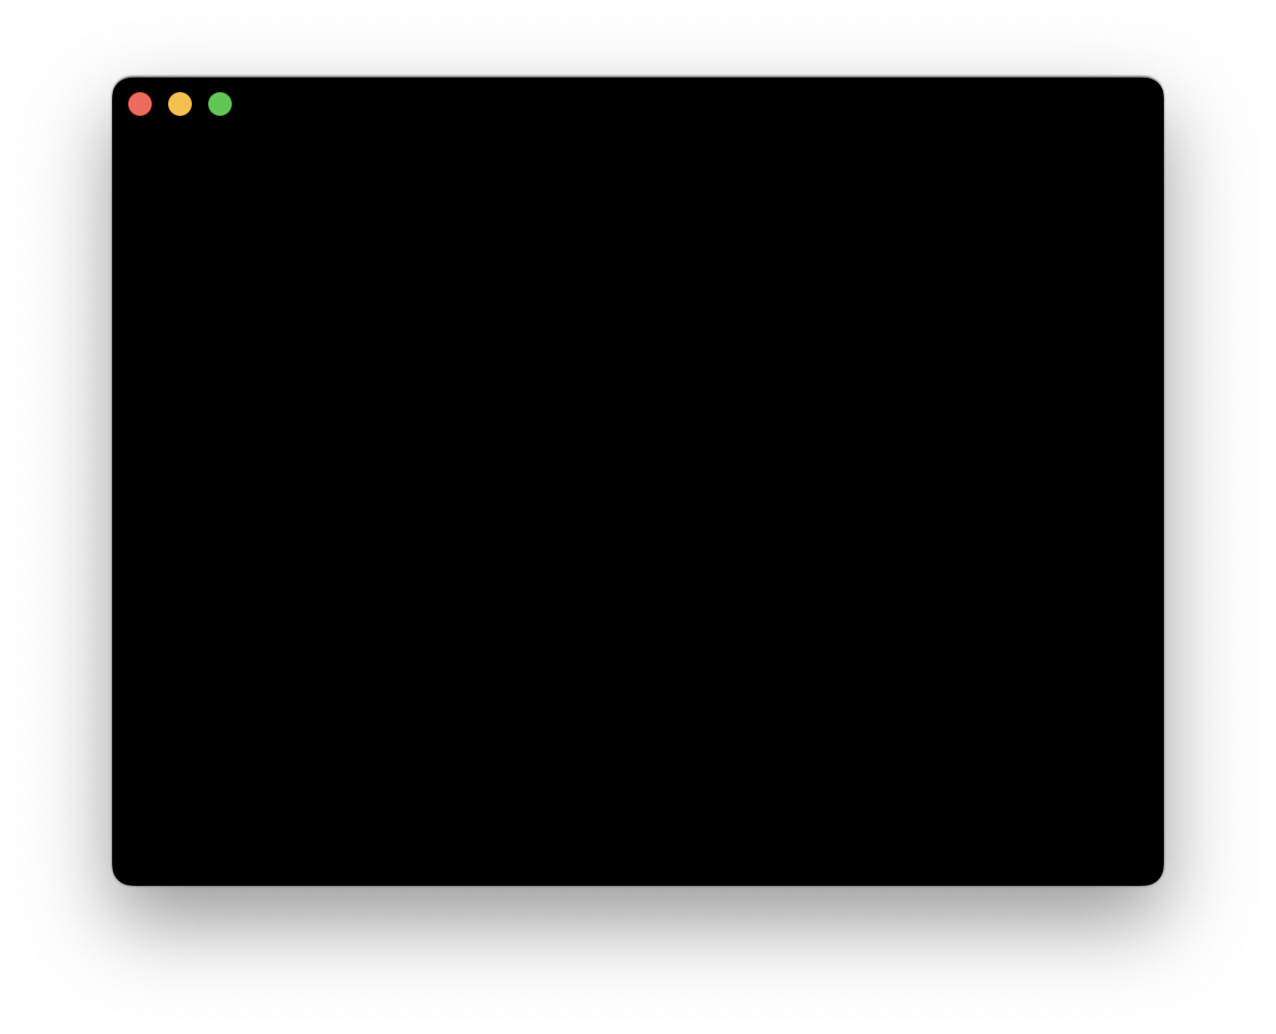 An app window with a black background and nothing in the foreground